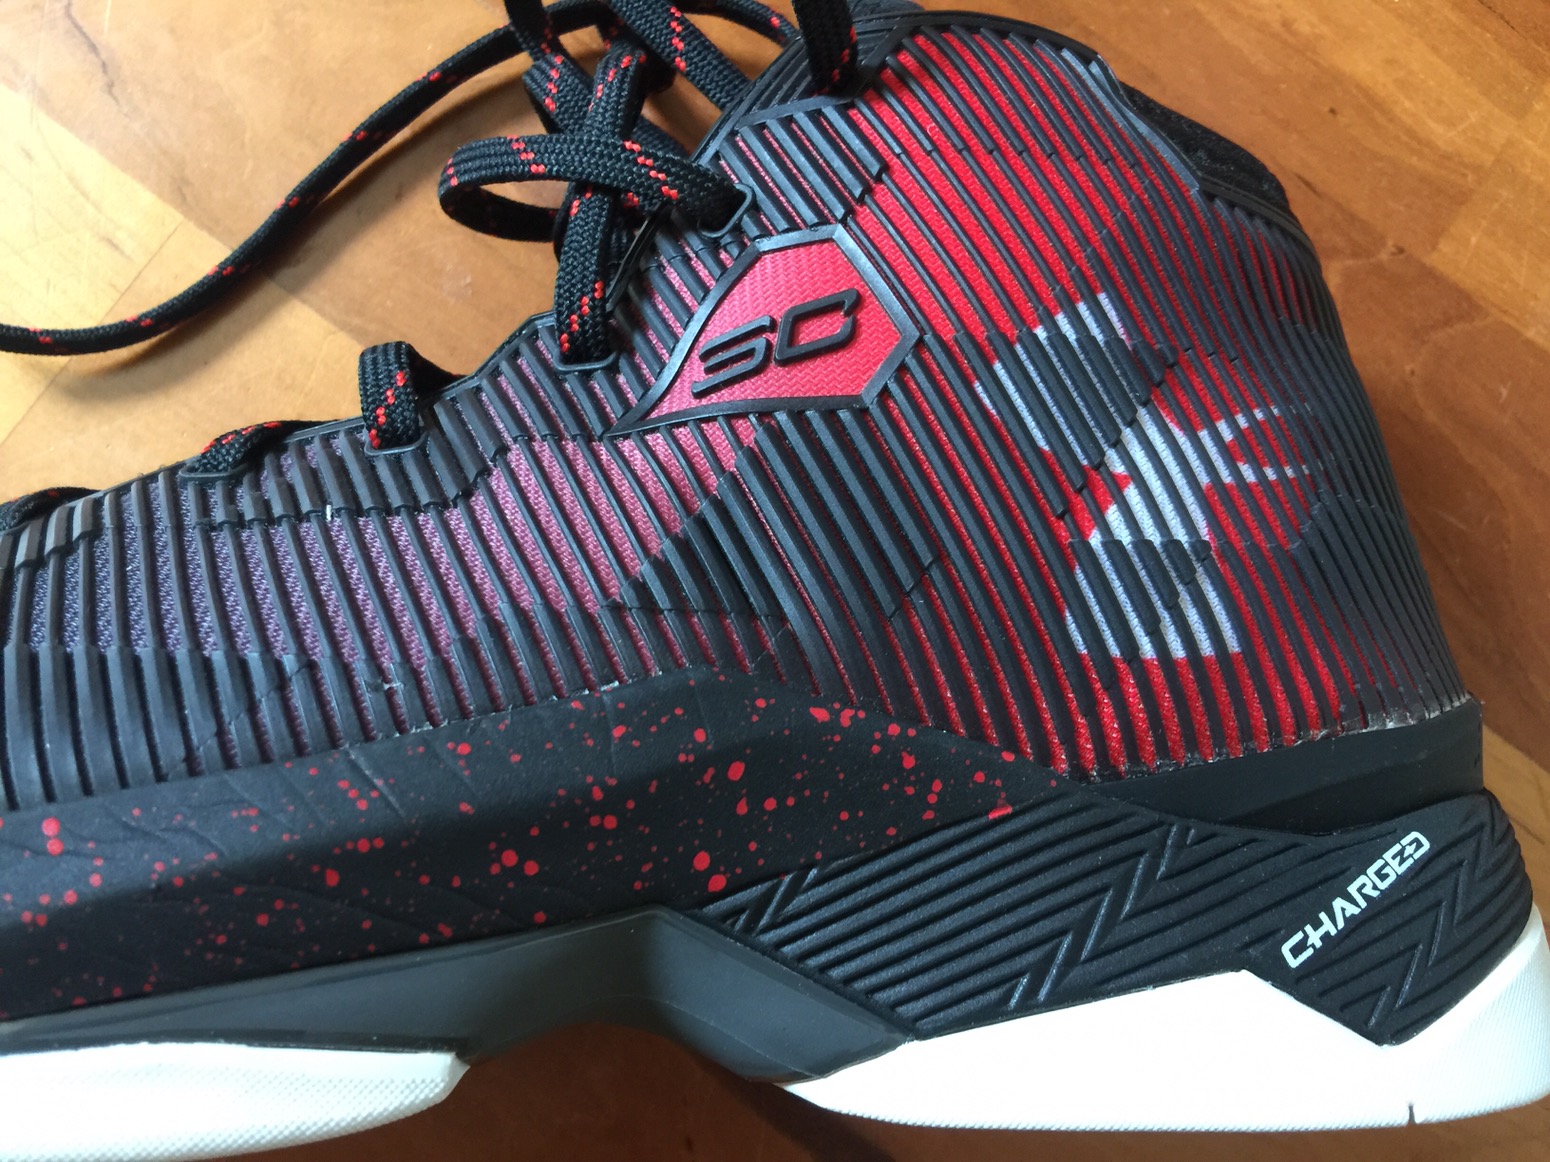 under armour curry 2.5 review